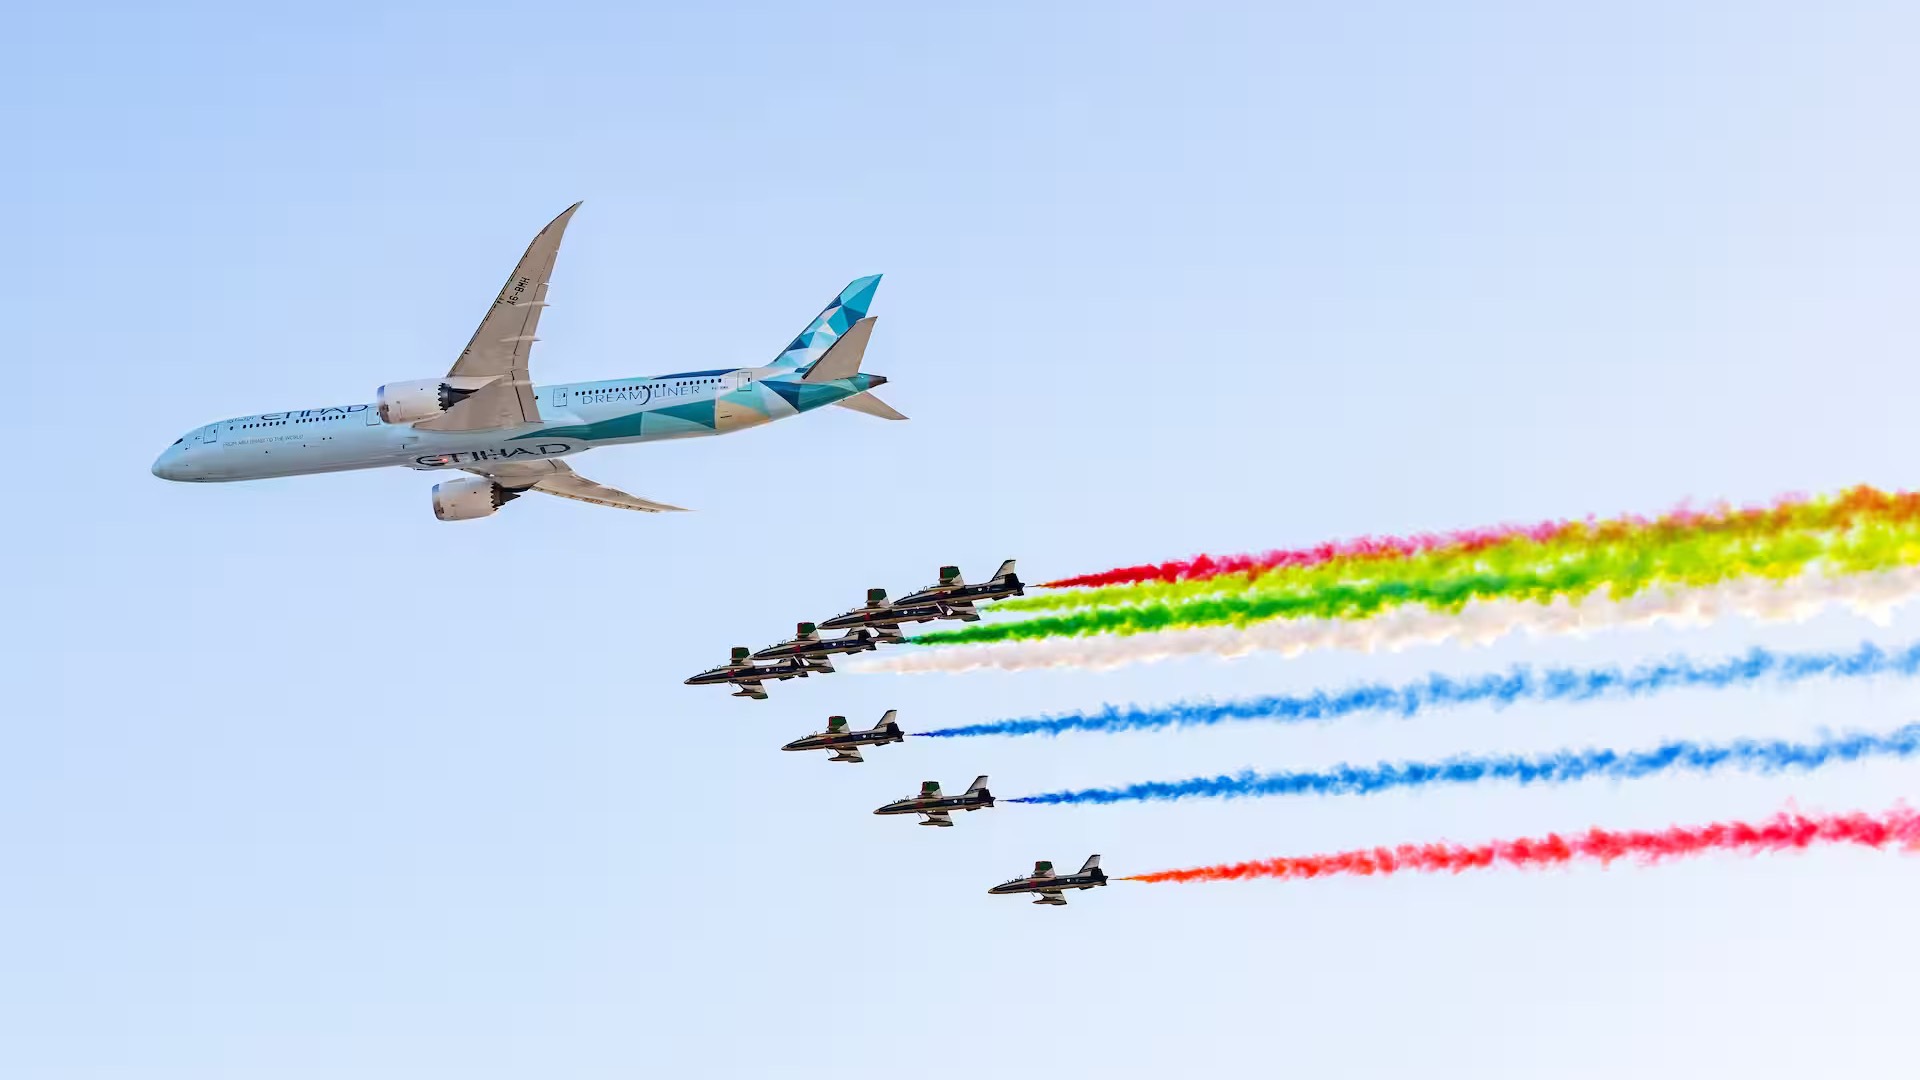 Etihad Airways elevates Grand Prix with spectacular 20th anniversary fly-past